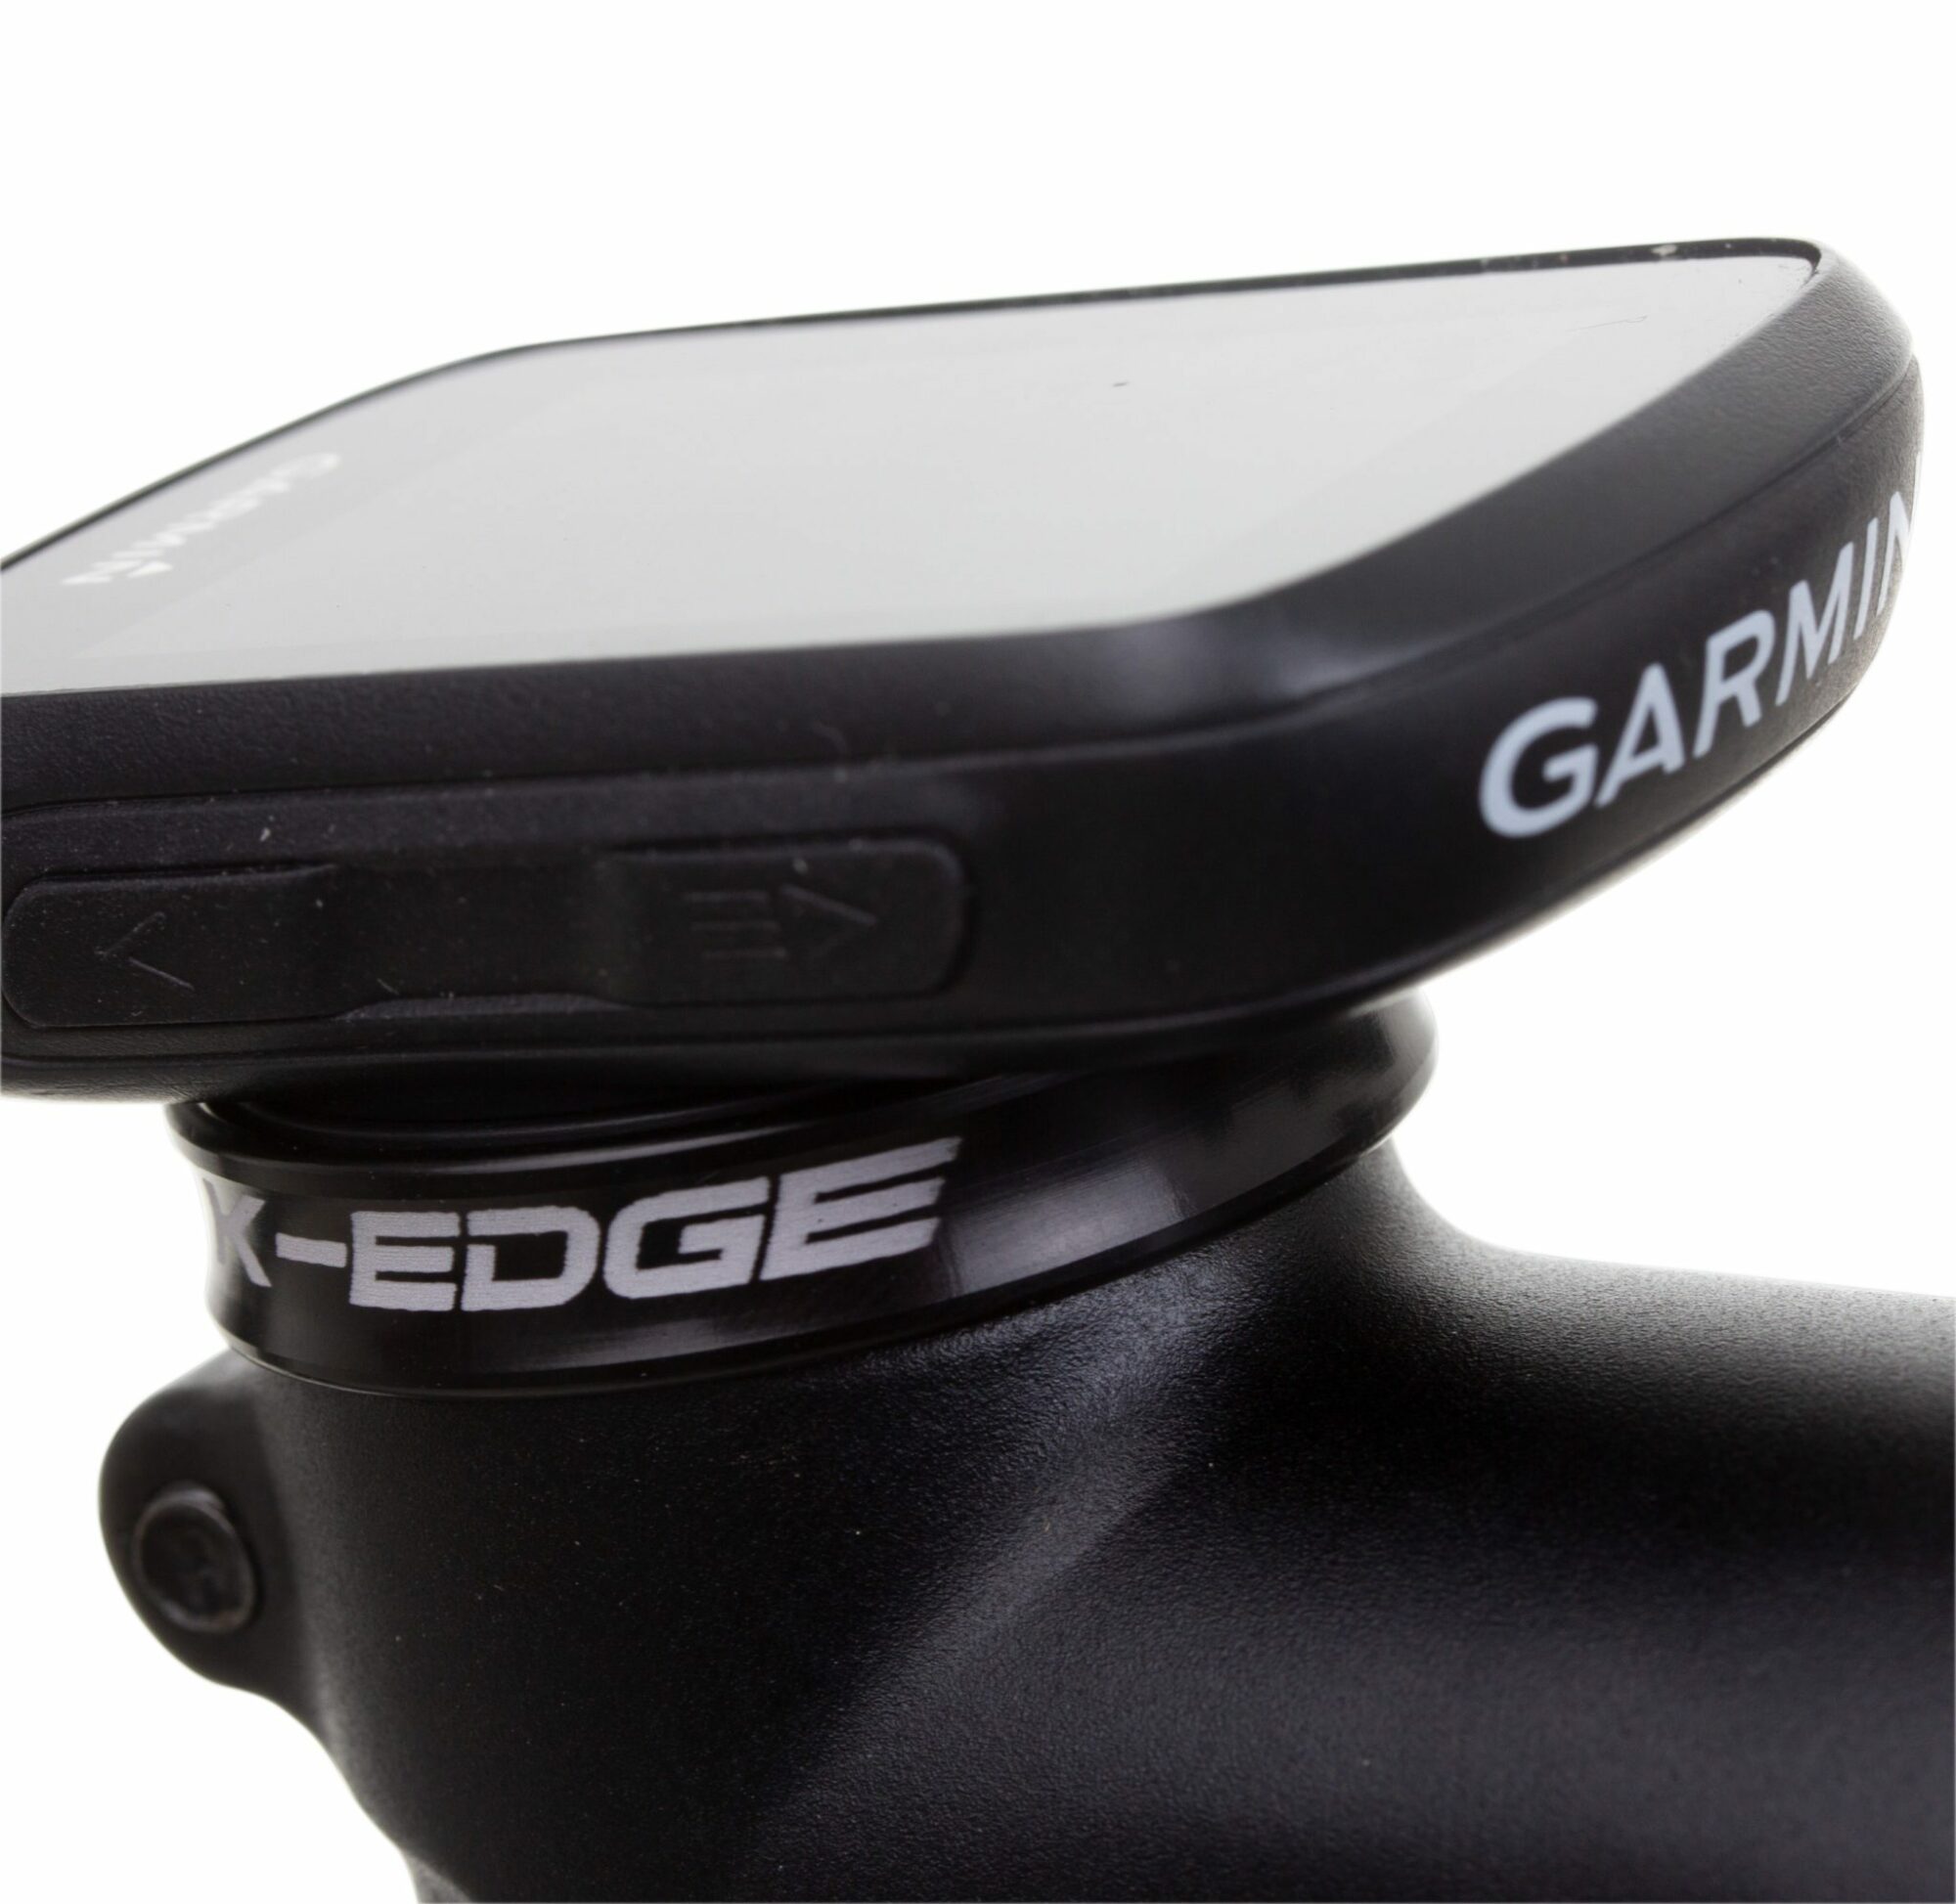 Icreopro Bicycle Gravity Cap Mount For Garmin Edge GPS Cycling Computer 